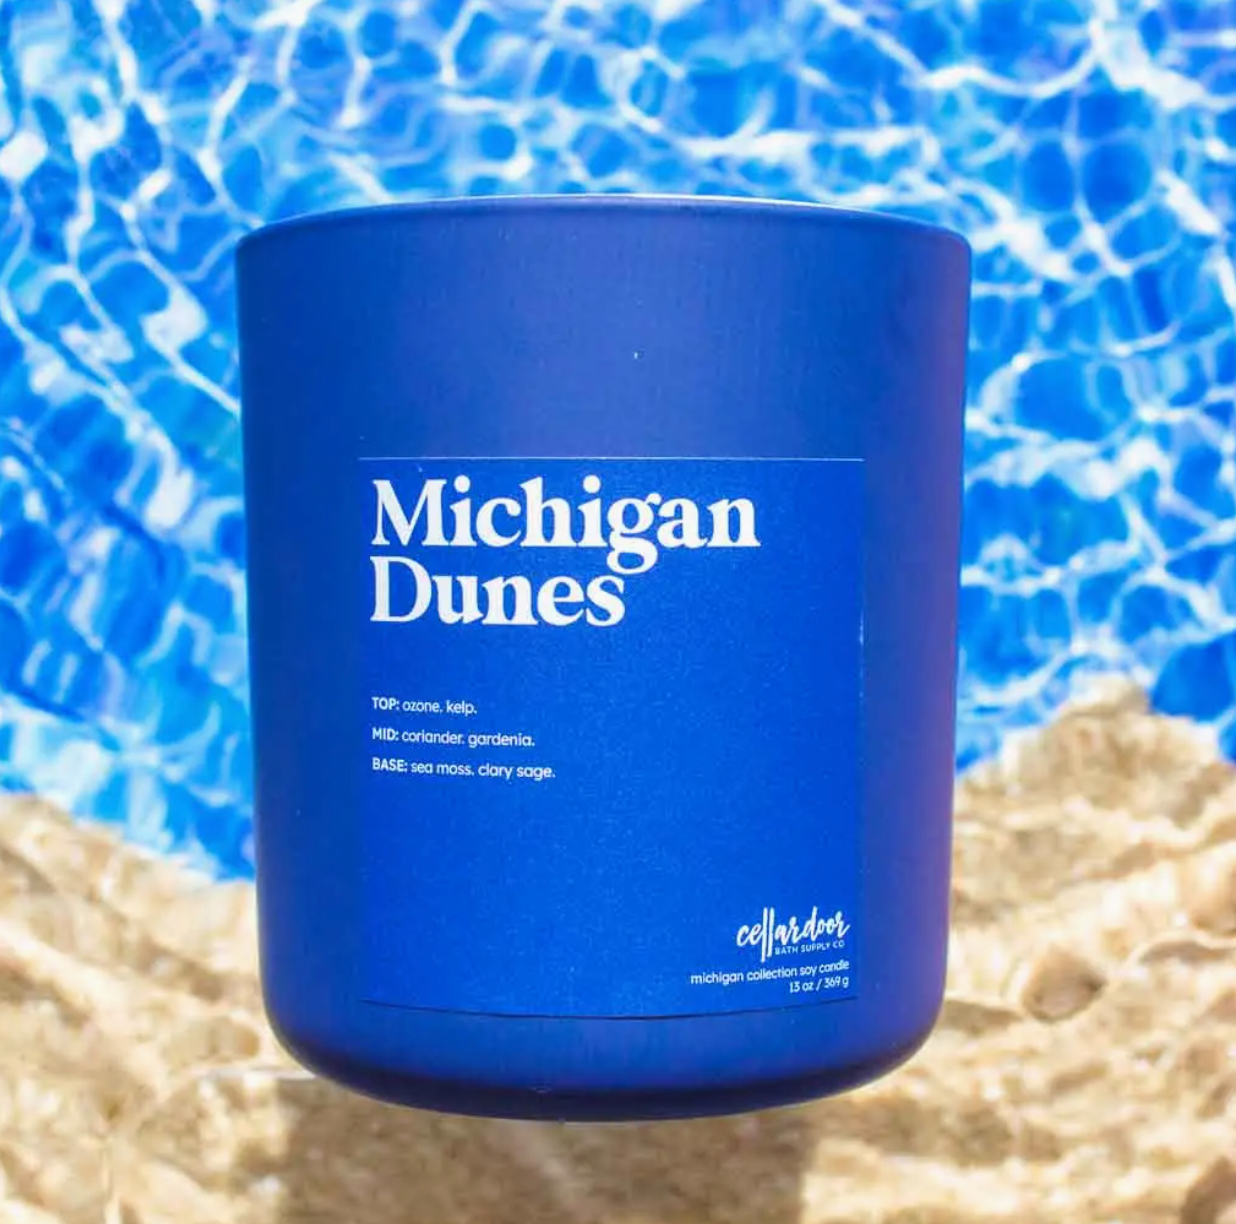 Michigan Dunes - 13 oz wood wick/soy candle